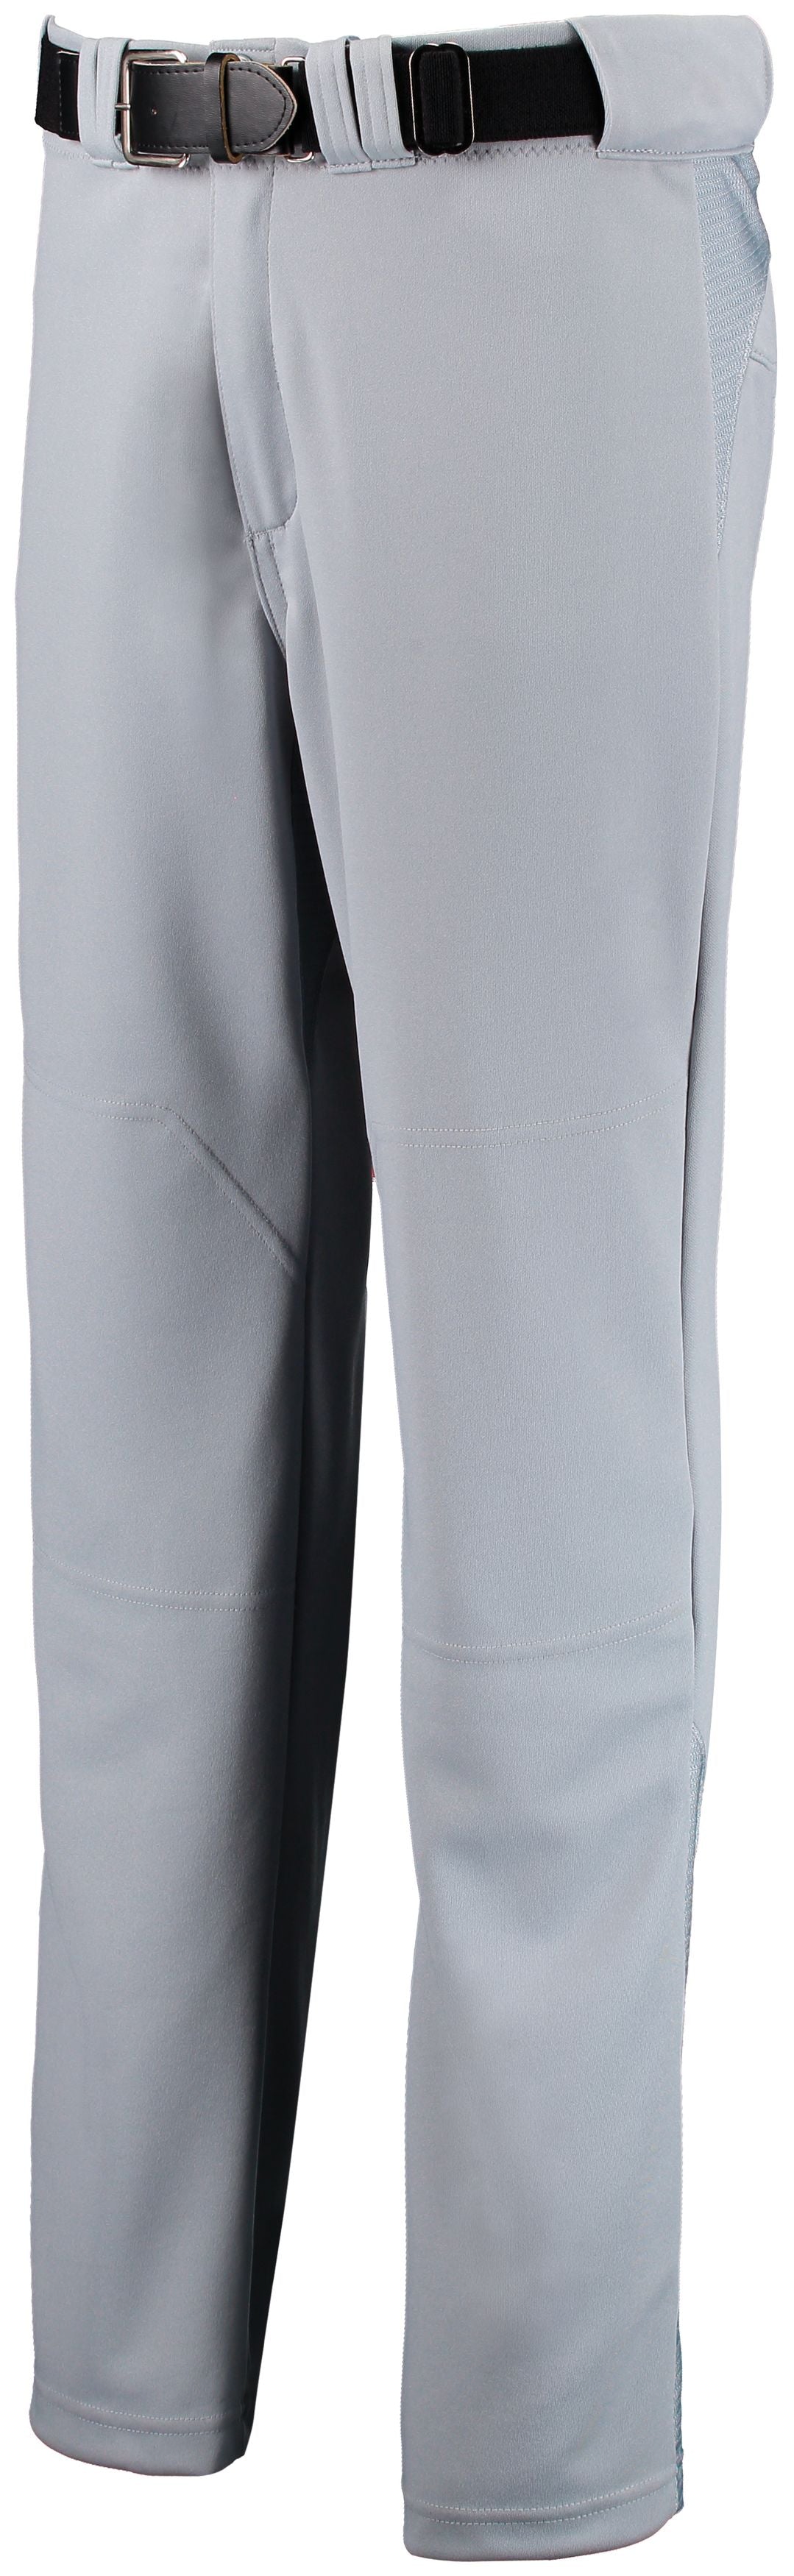 Russell Athletic Youth Diamond Fit Series Pant in Baseball Grey  -Part of the Youth, Youth-Pants, Pants, Baseball, Russell-Athletic-Products, All-Sports, All-Sports-1 product lines at KanaleyCreations.com